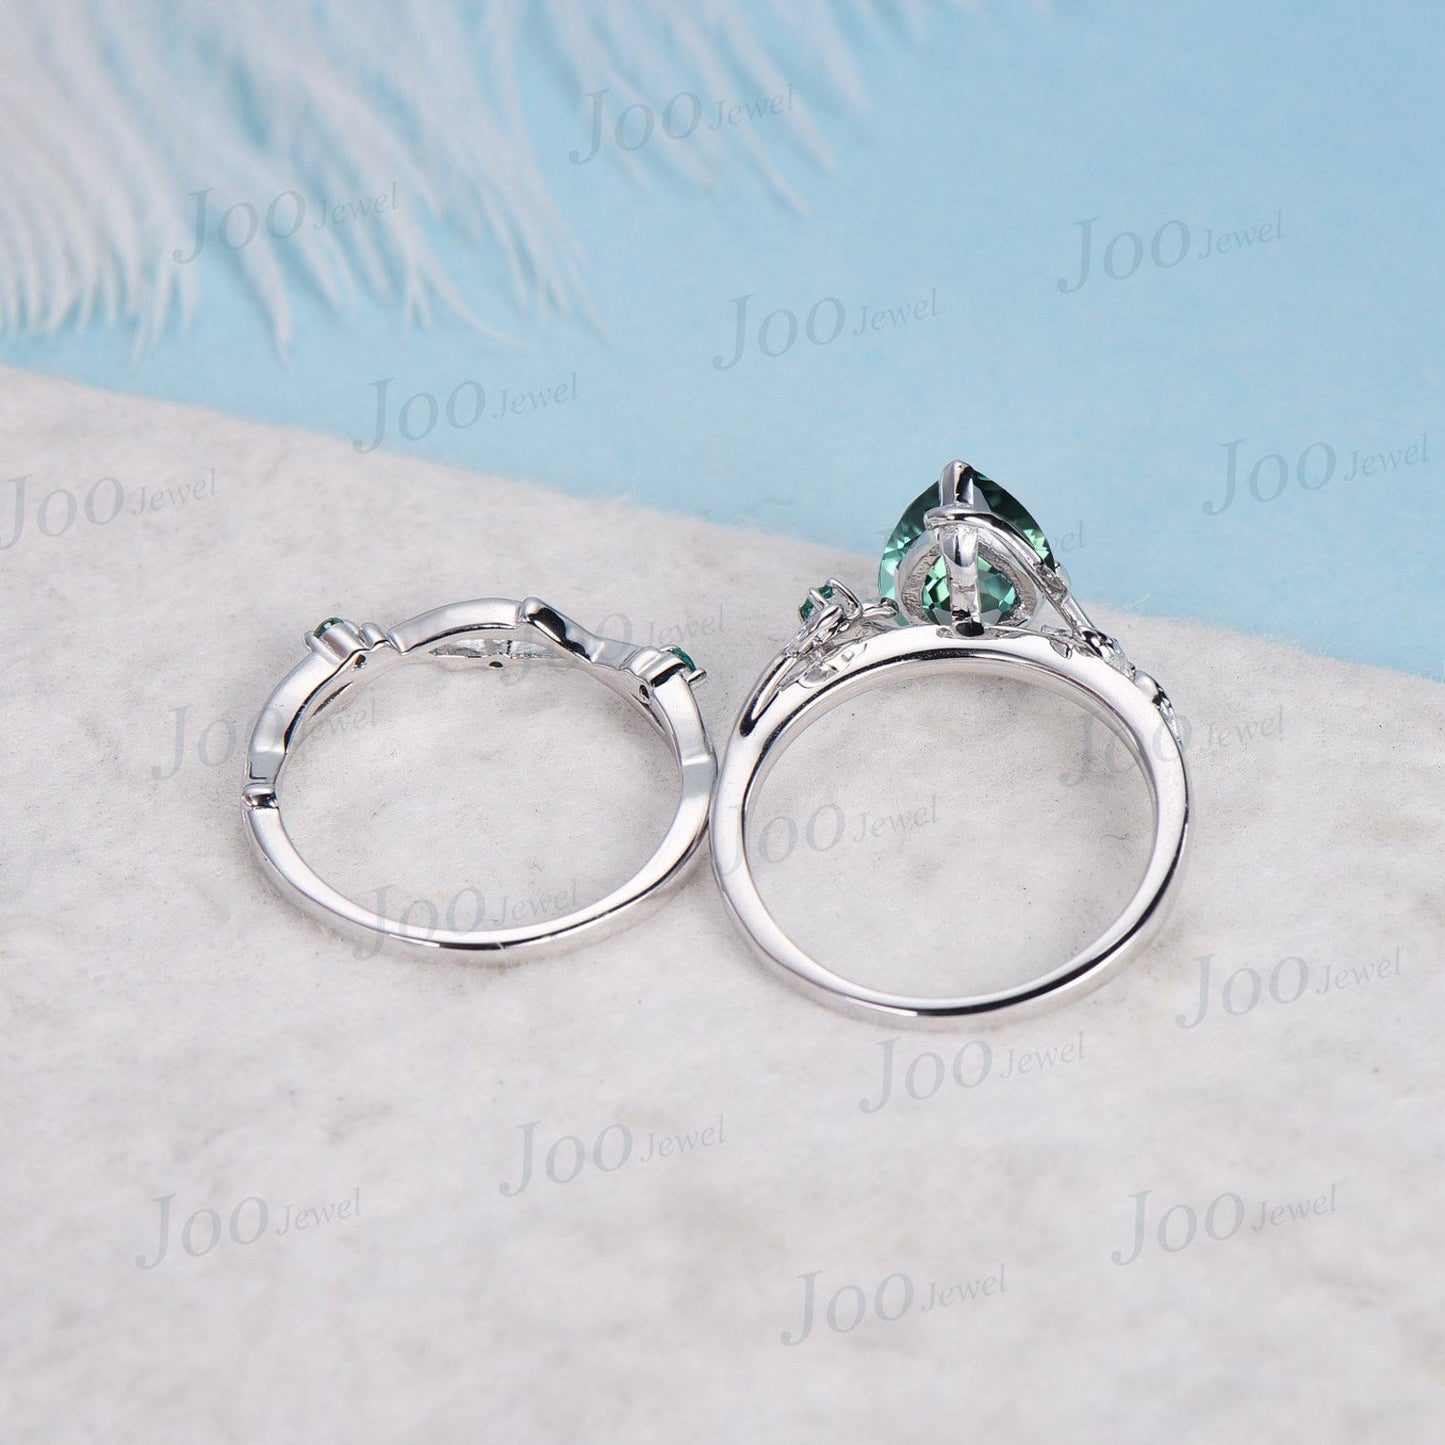 1.25ct Pear Cut Nature Inspired Green Sapphire Engagement Ring Set 10K White Gold Teal Sapphire Green Emerald Ring Unique Wedding Ring Women